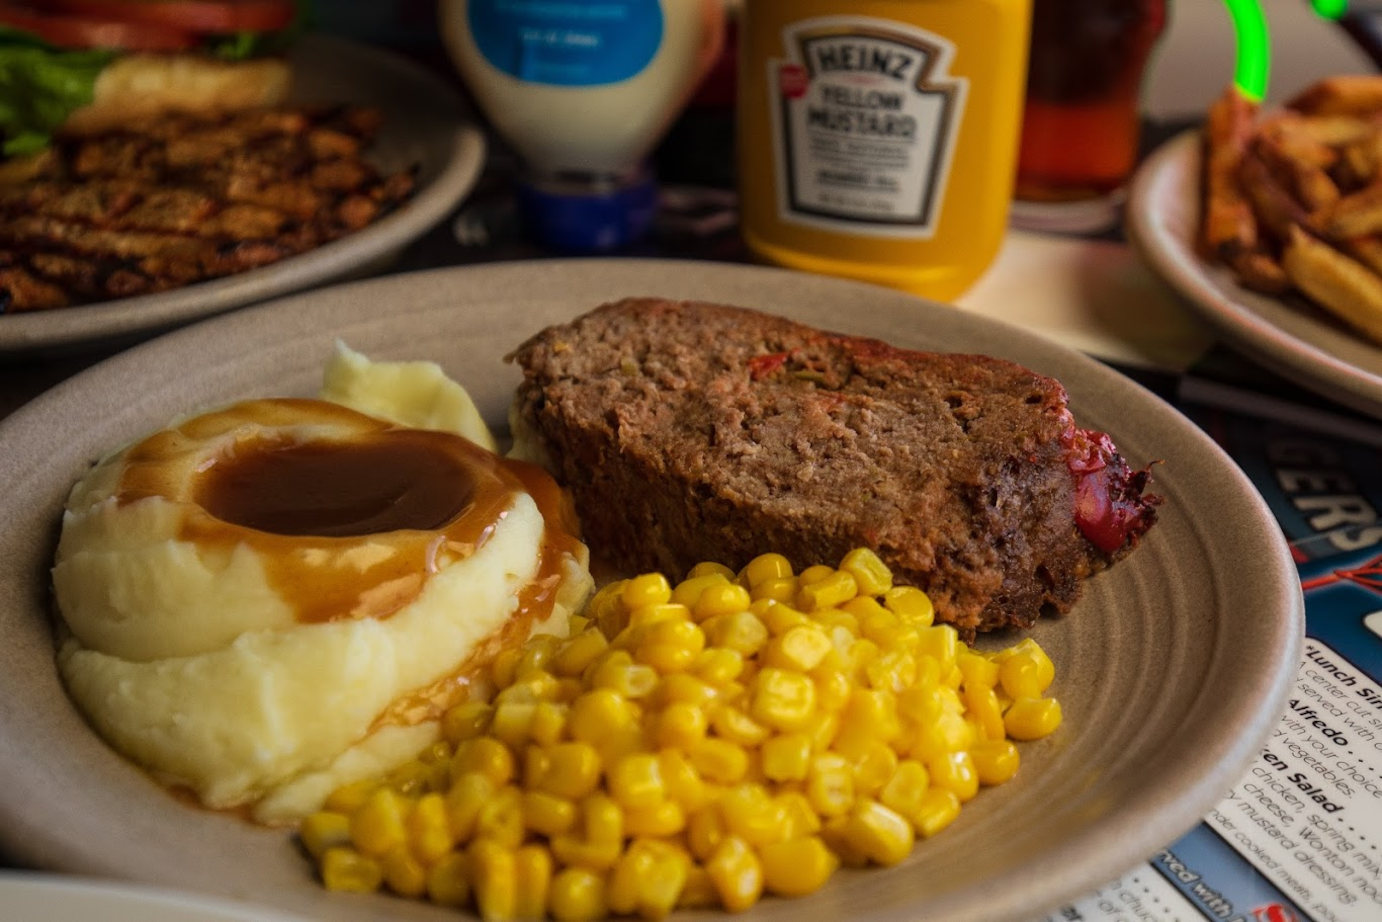 Meatloaf with mashed potatoes and sweet corn